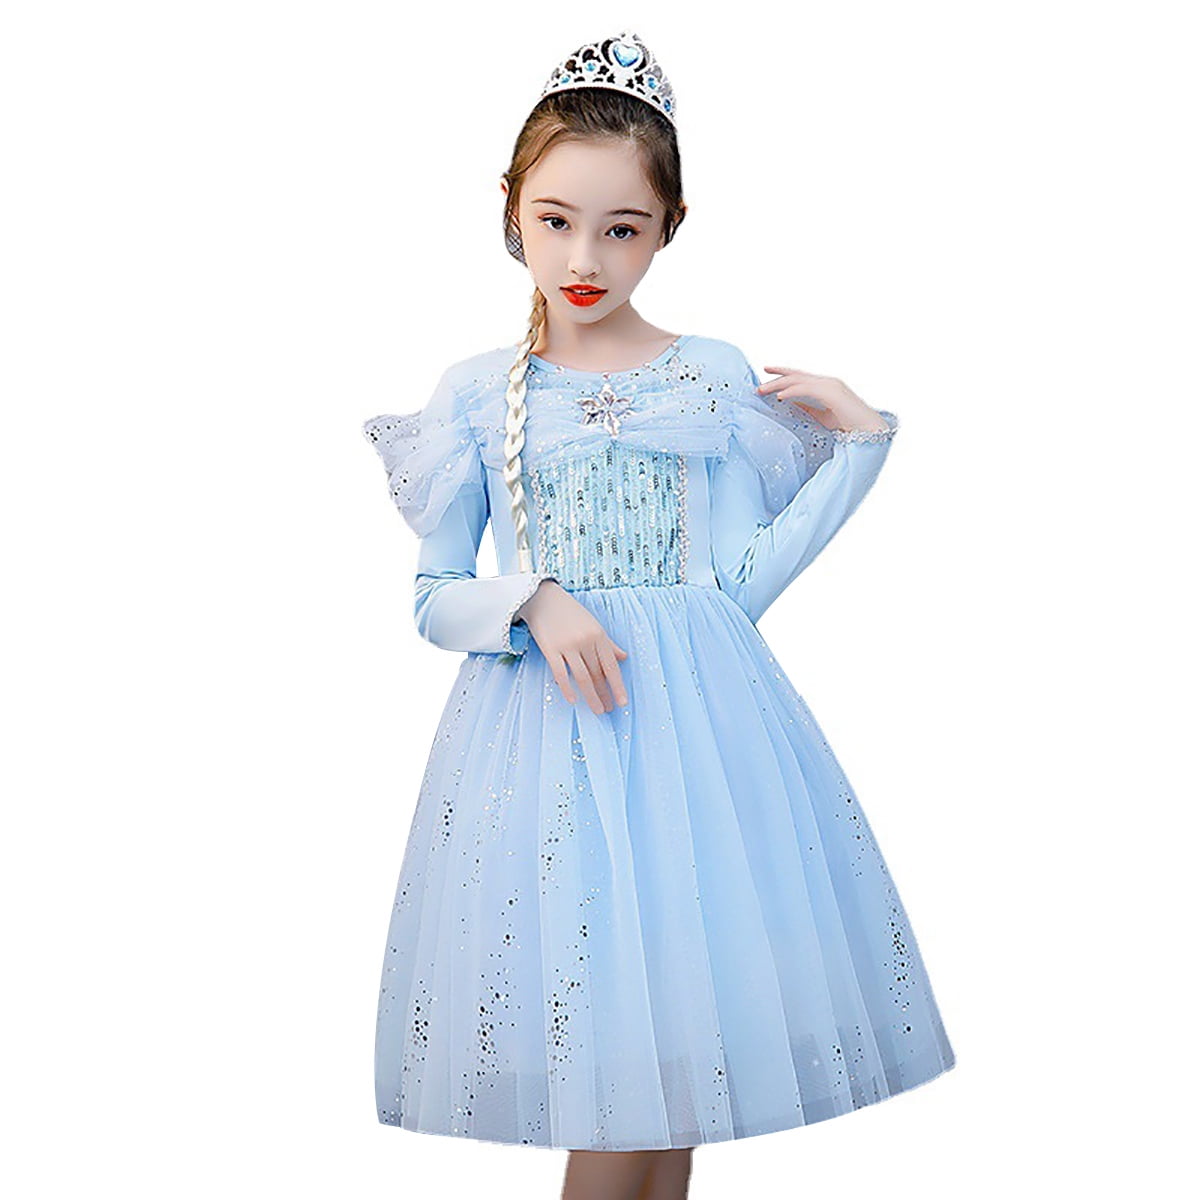 Xinfenglai Girls White Sequin Cosplay Dance Princess Costume Long Sleeve Dress Up